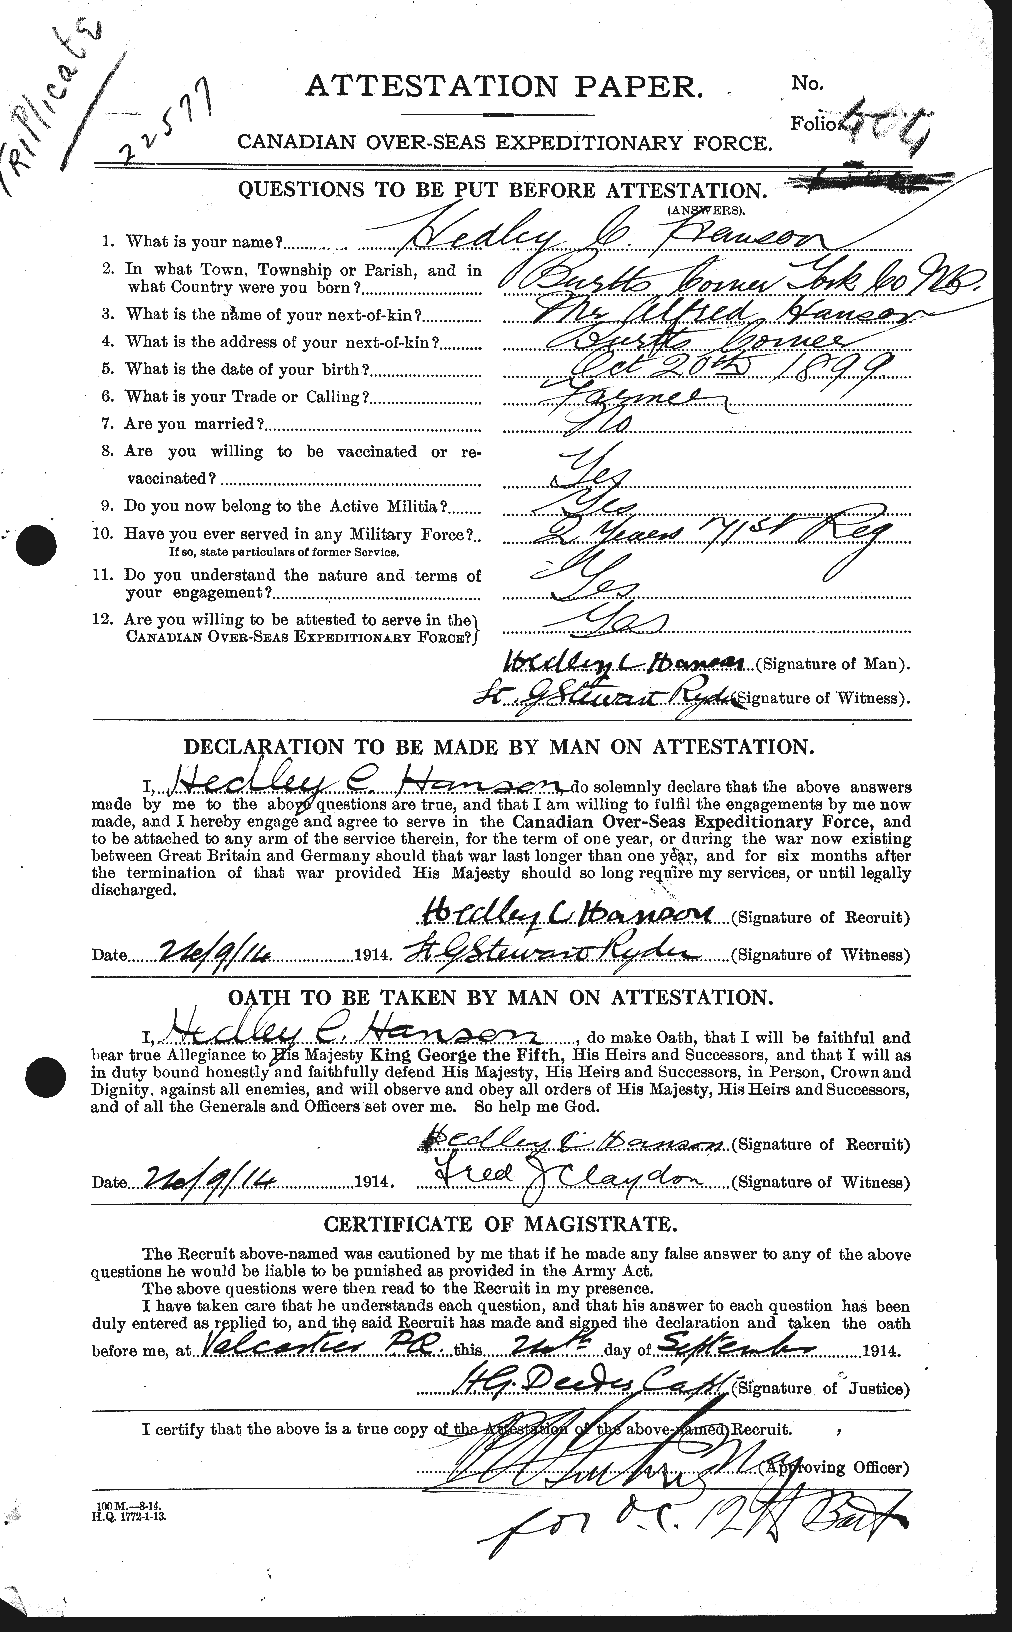 Personnel Records of the First World War - CEF 375915a